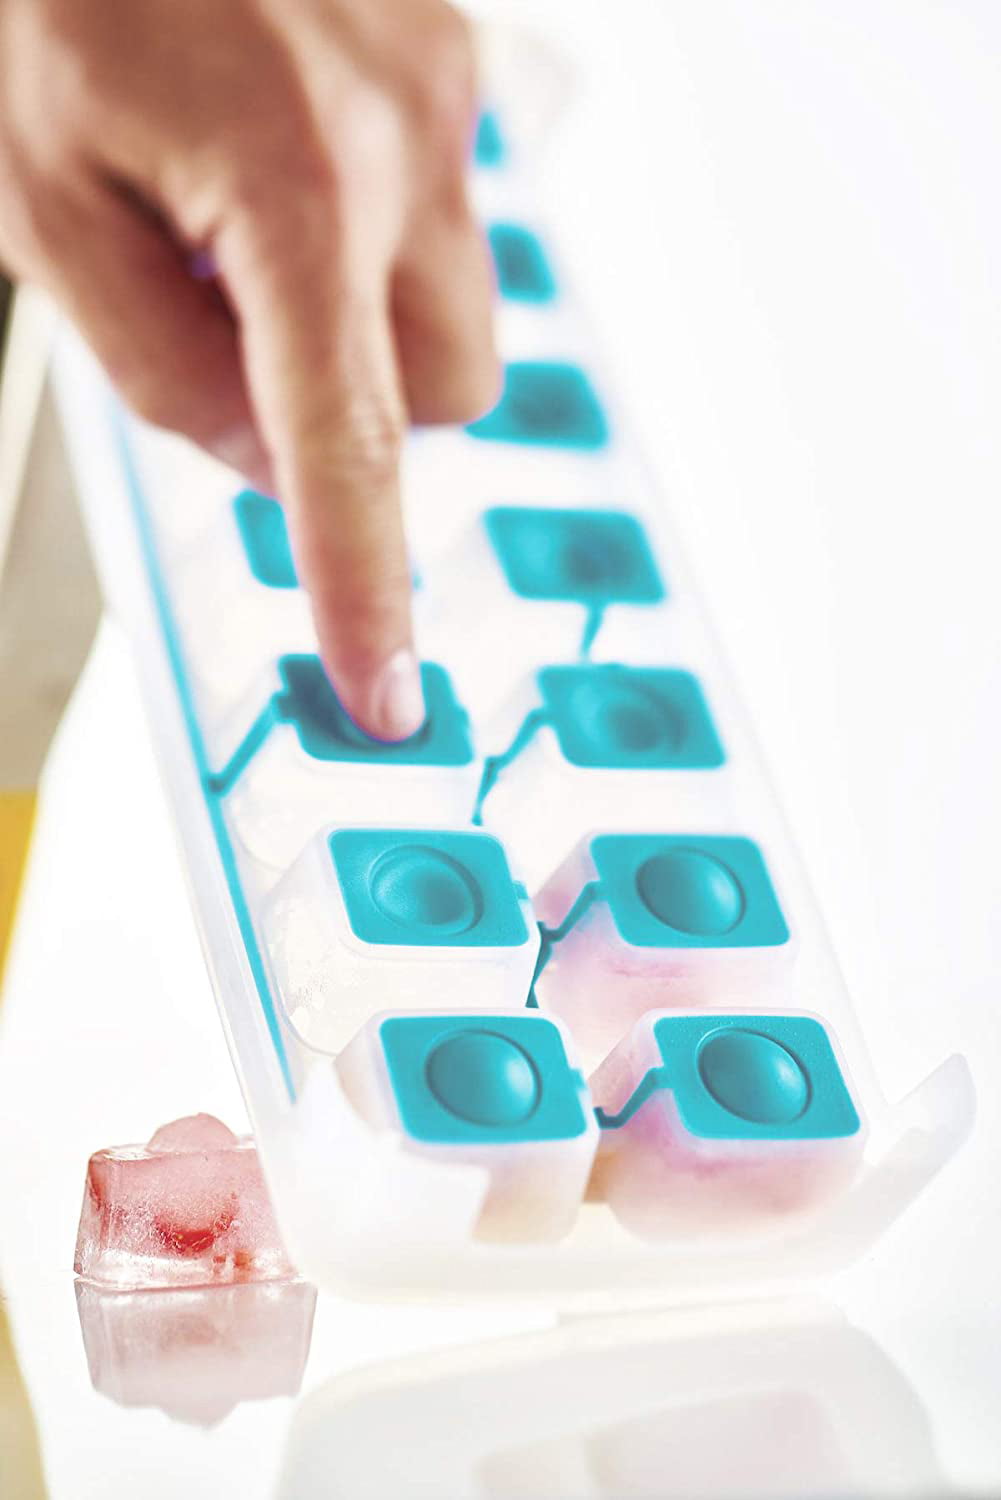 Tupperware Clear Ice Cube Trays